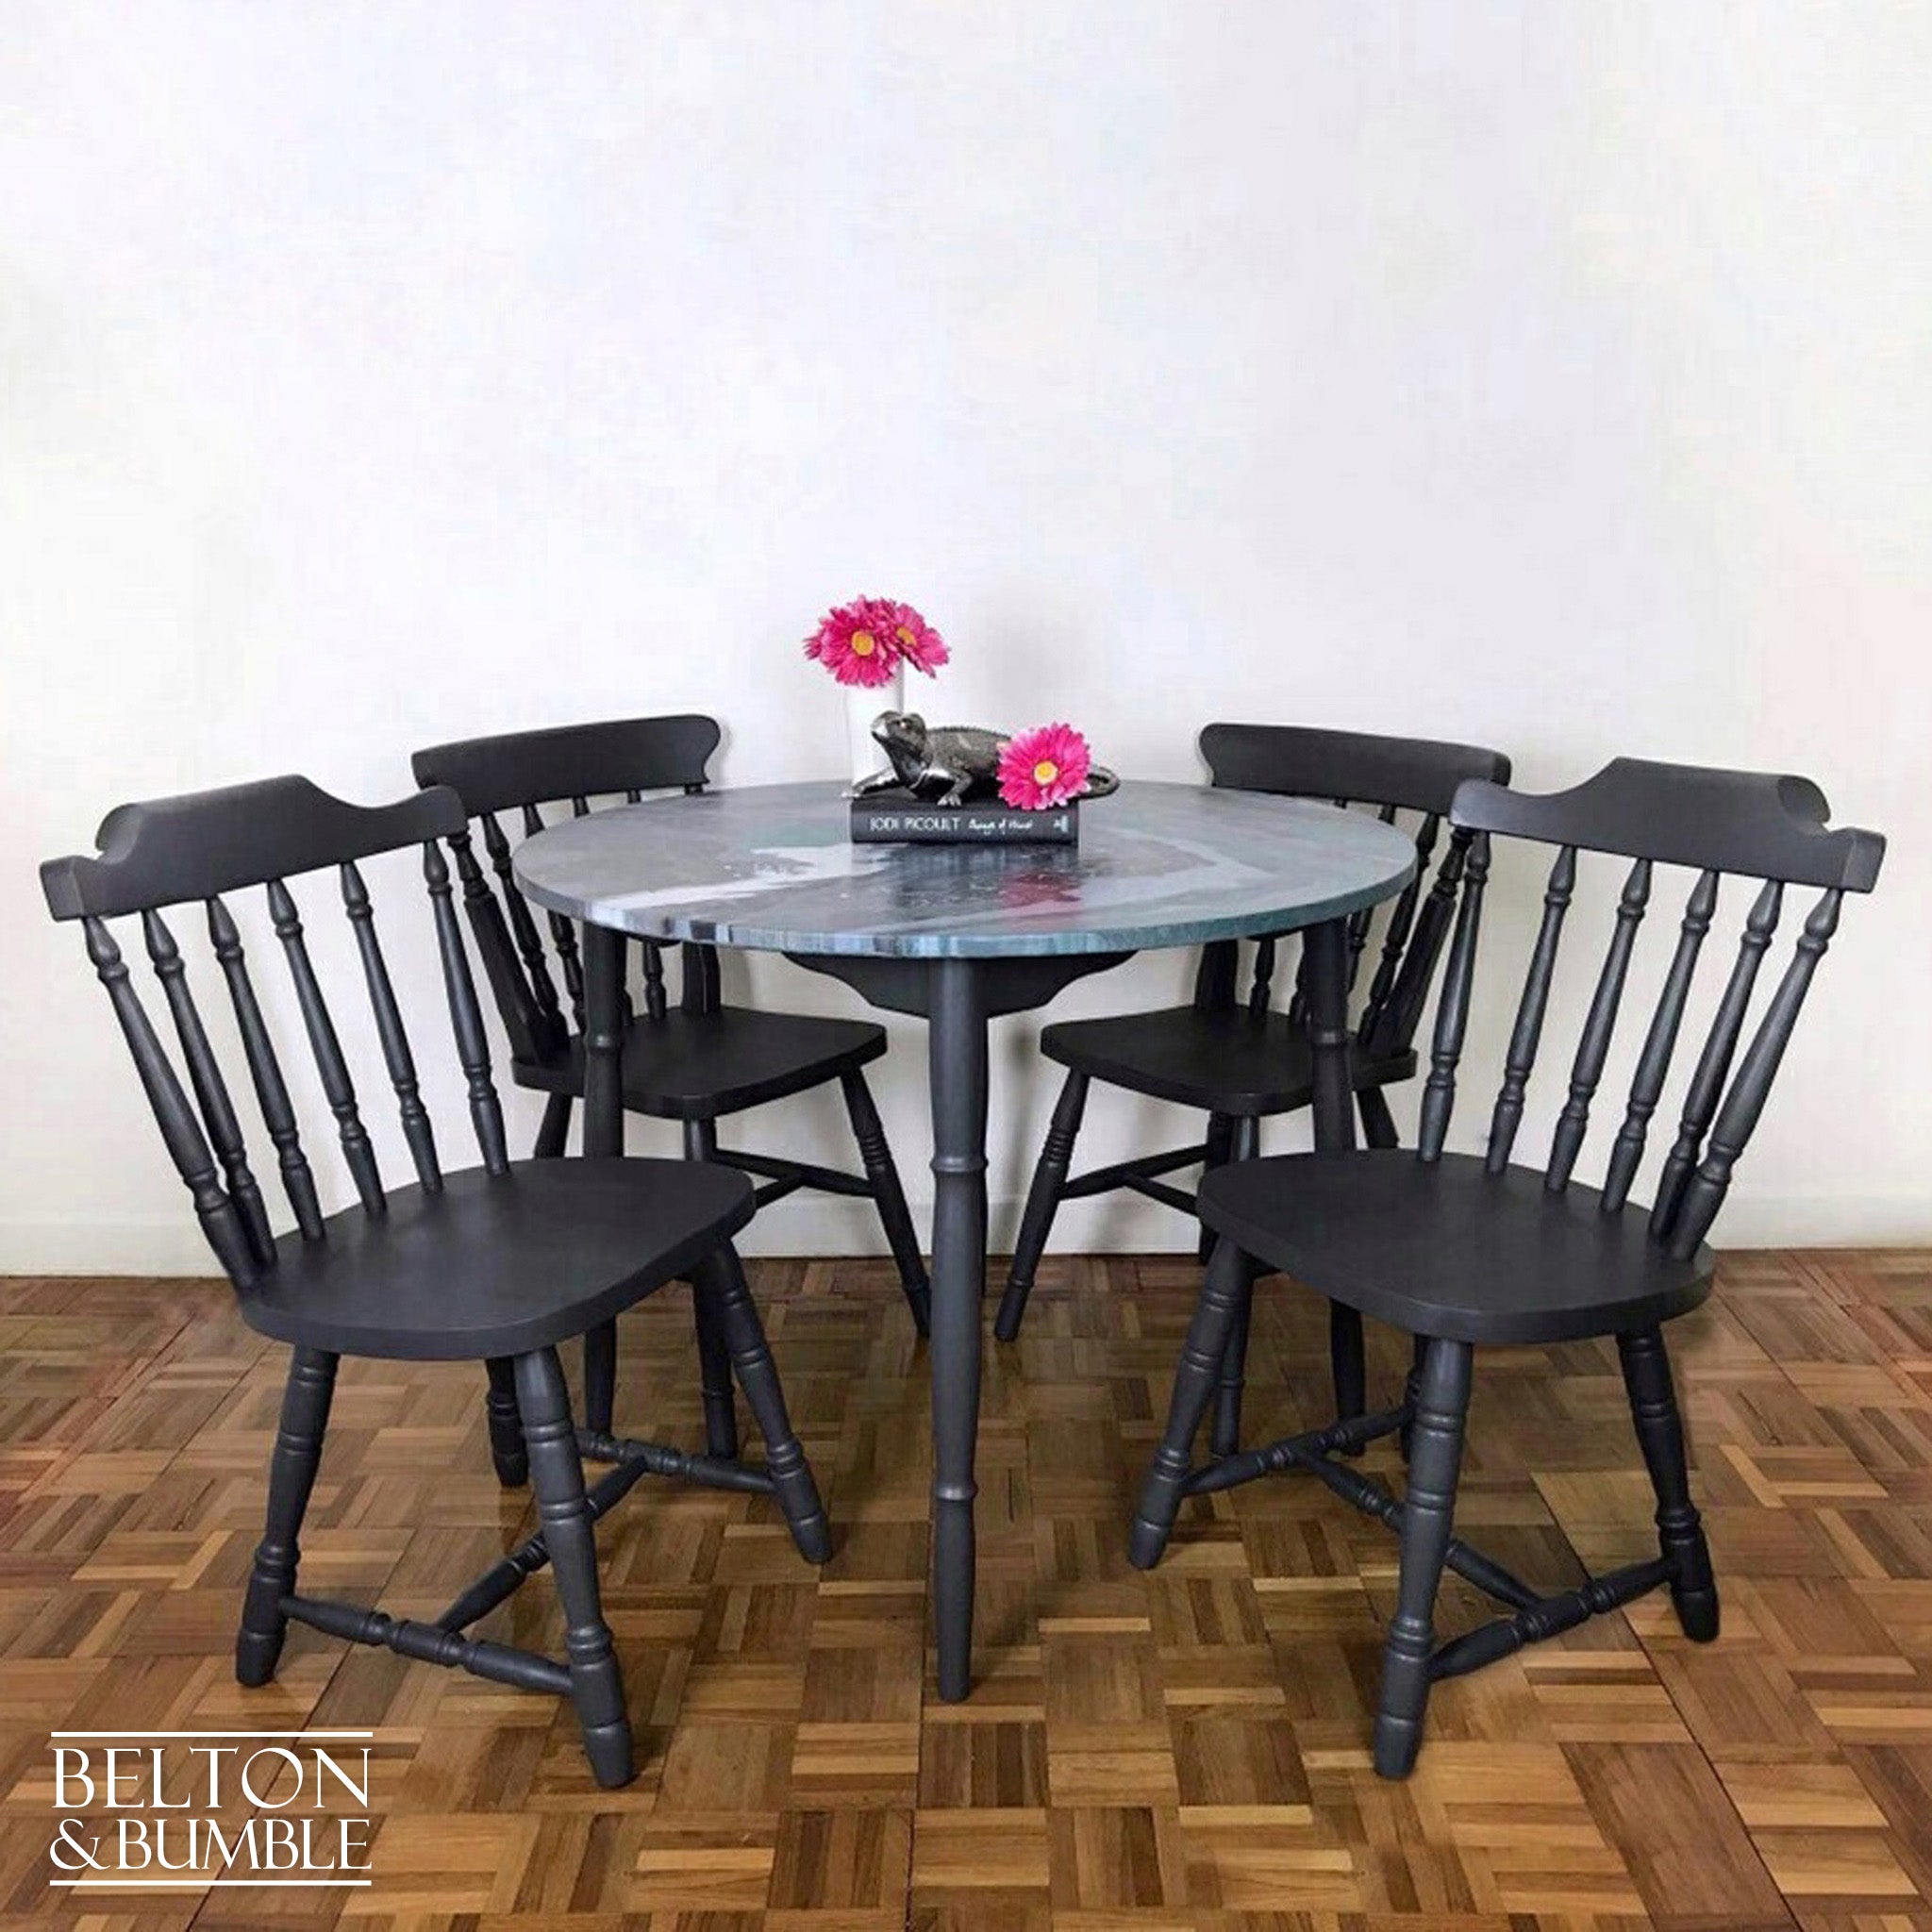 Dark Grey Dining Table and Four Chair Set with Acrylic Paint Pour on the Top of Table.-Belton & Butler